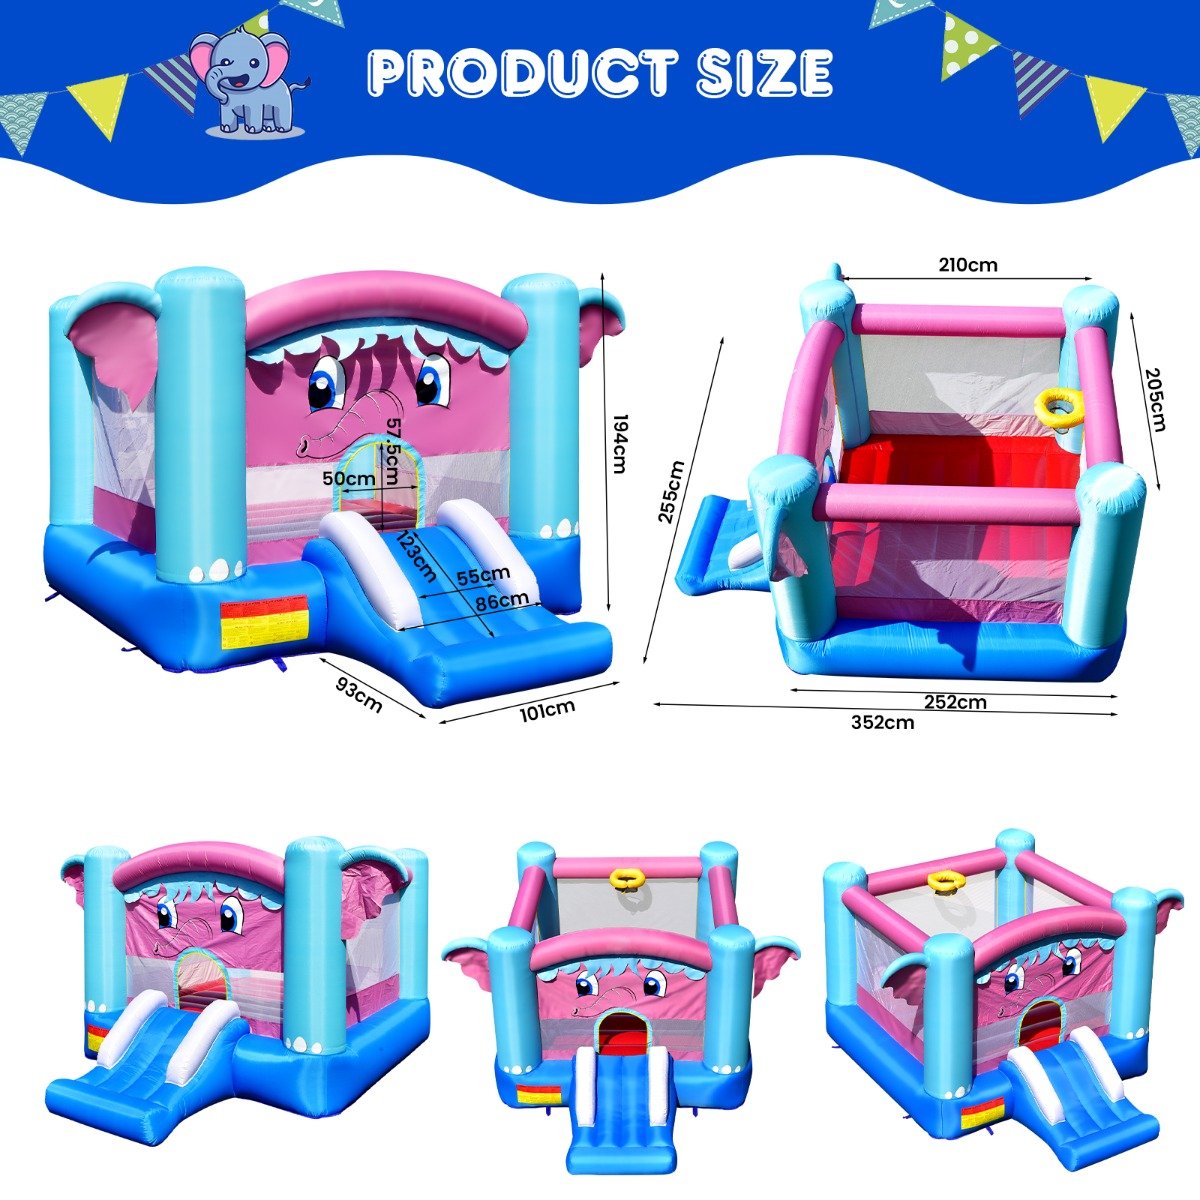 Inflatable Castle - Your Gateway to Endless Fun and Adventure